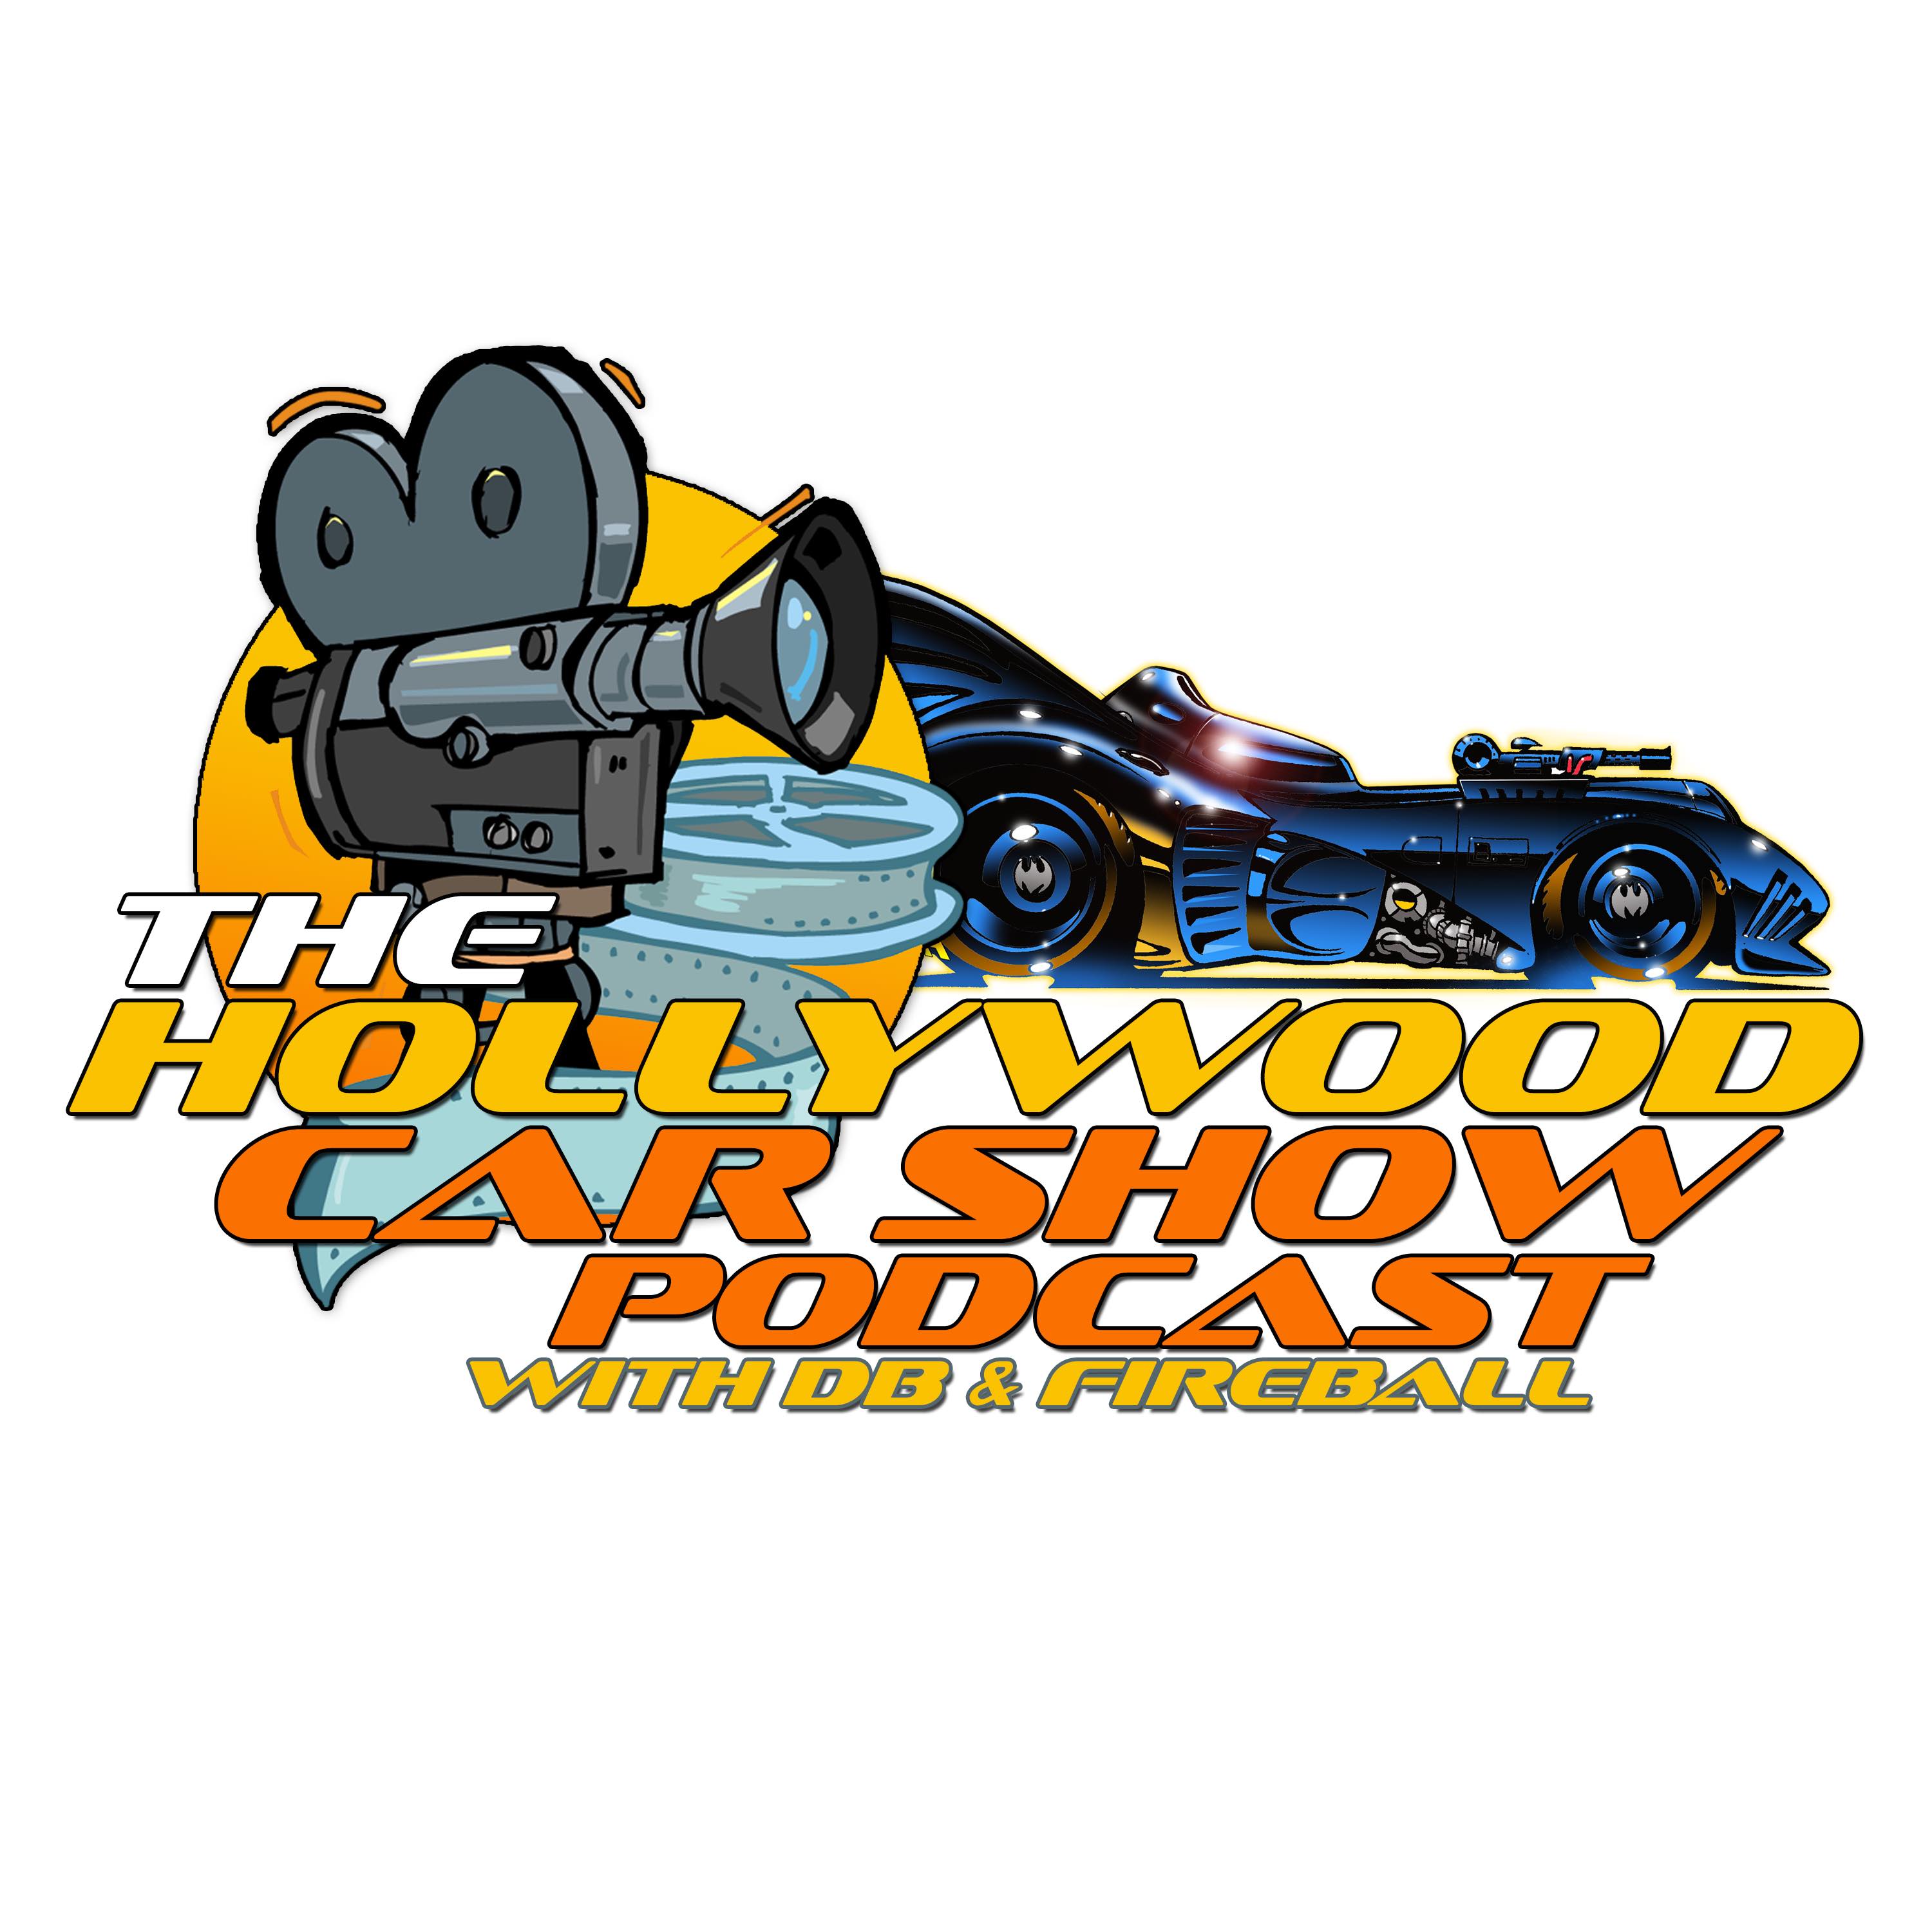 Artwork for The Hollywood Car Show